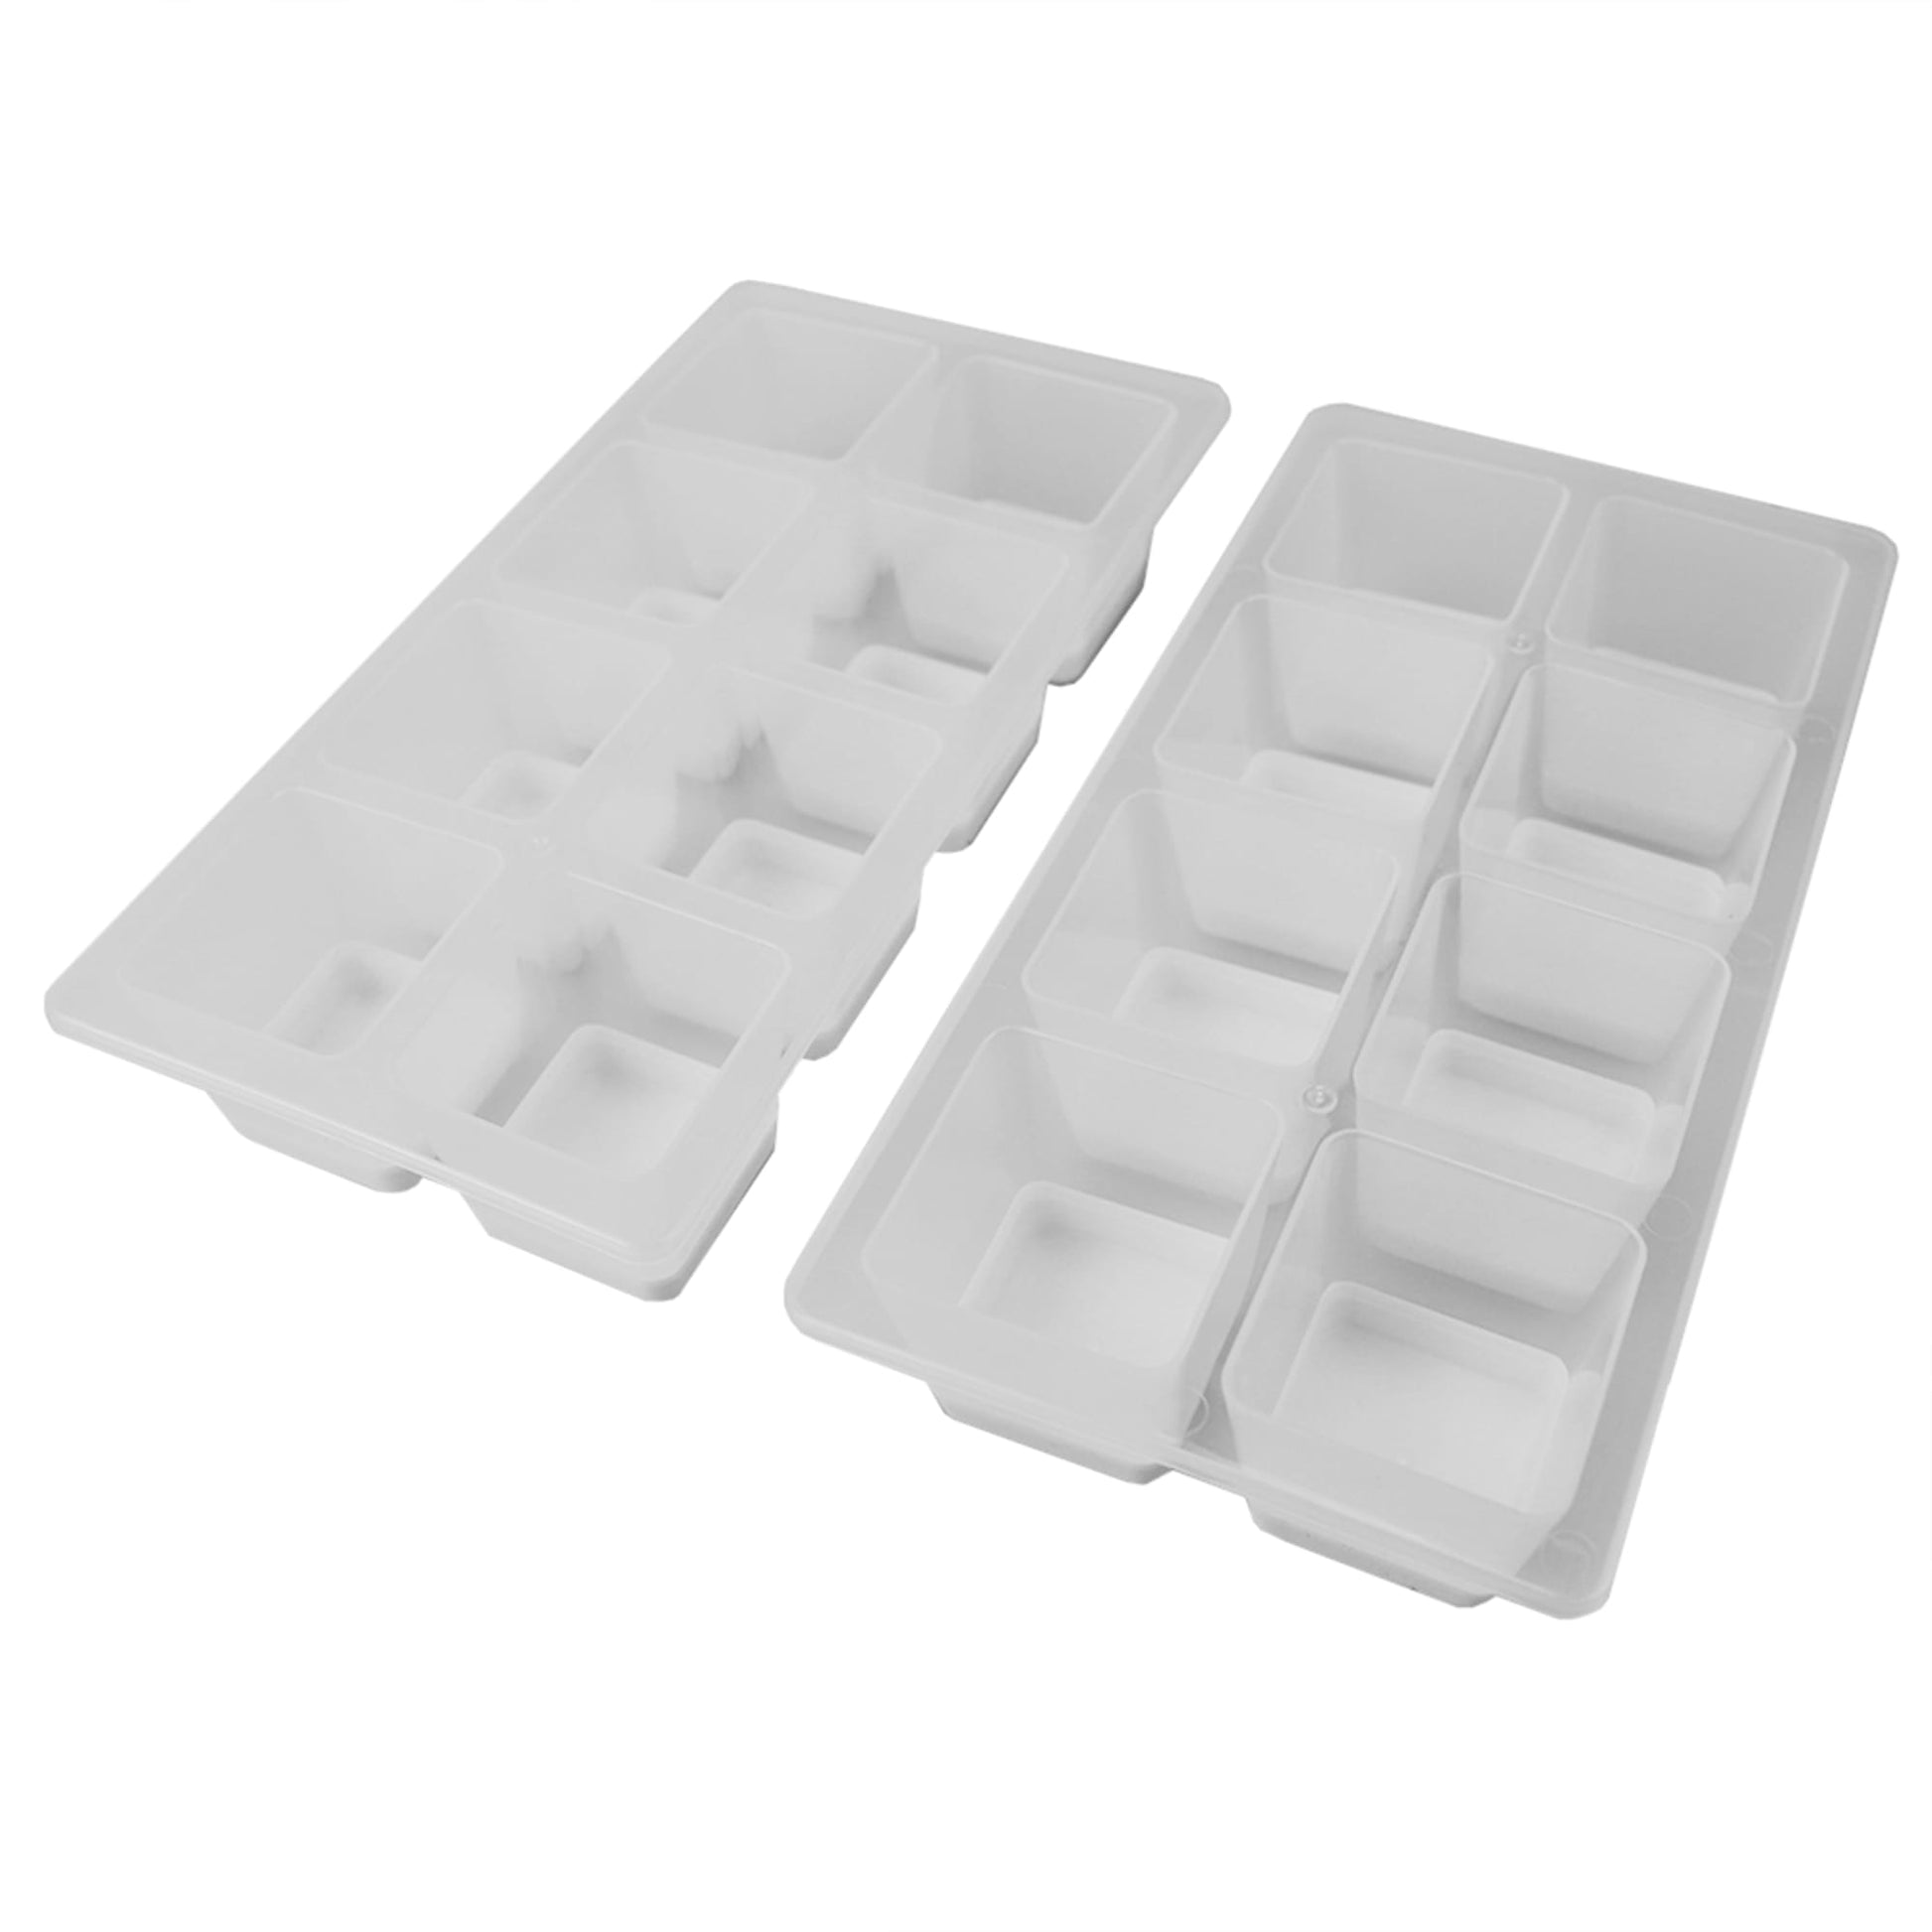 Handy Housewares 2 Jumbo Silicone Push Ice Cube Tray - Makes 8 Large Cubes  - Teal Green 3 pack 